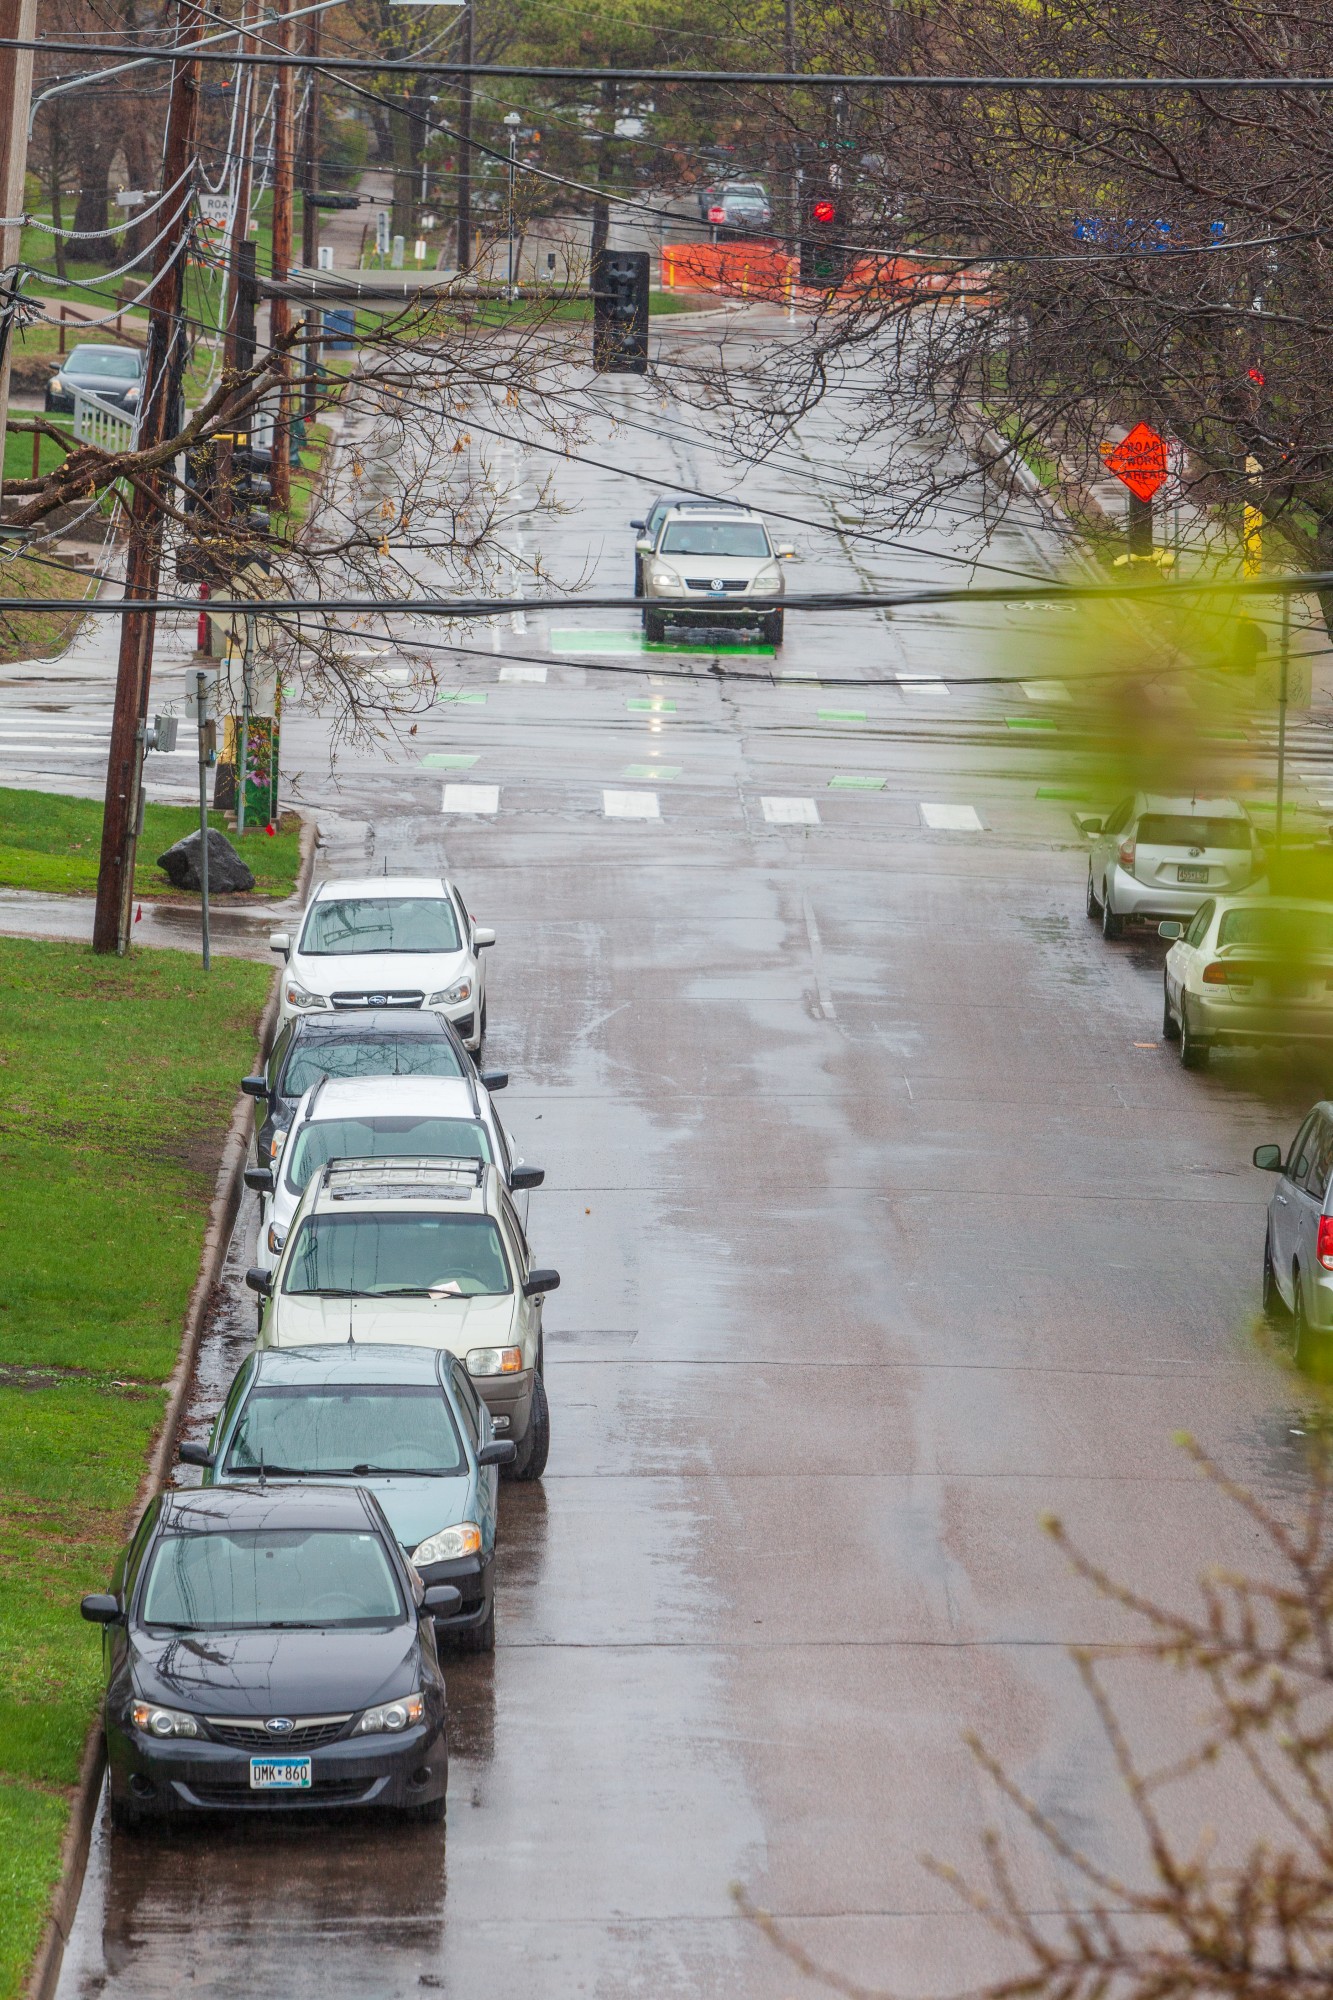 Parked cars line a residential street in the Como neighborhood on Tuesday, April 28.